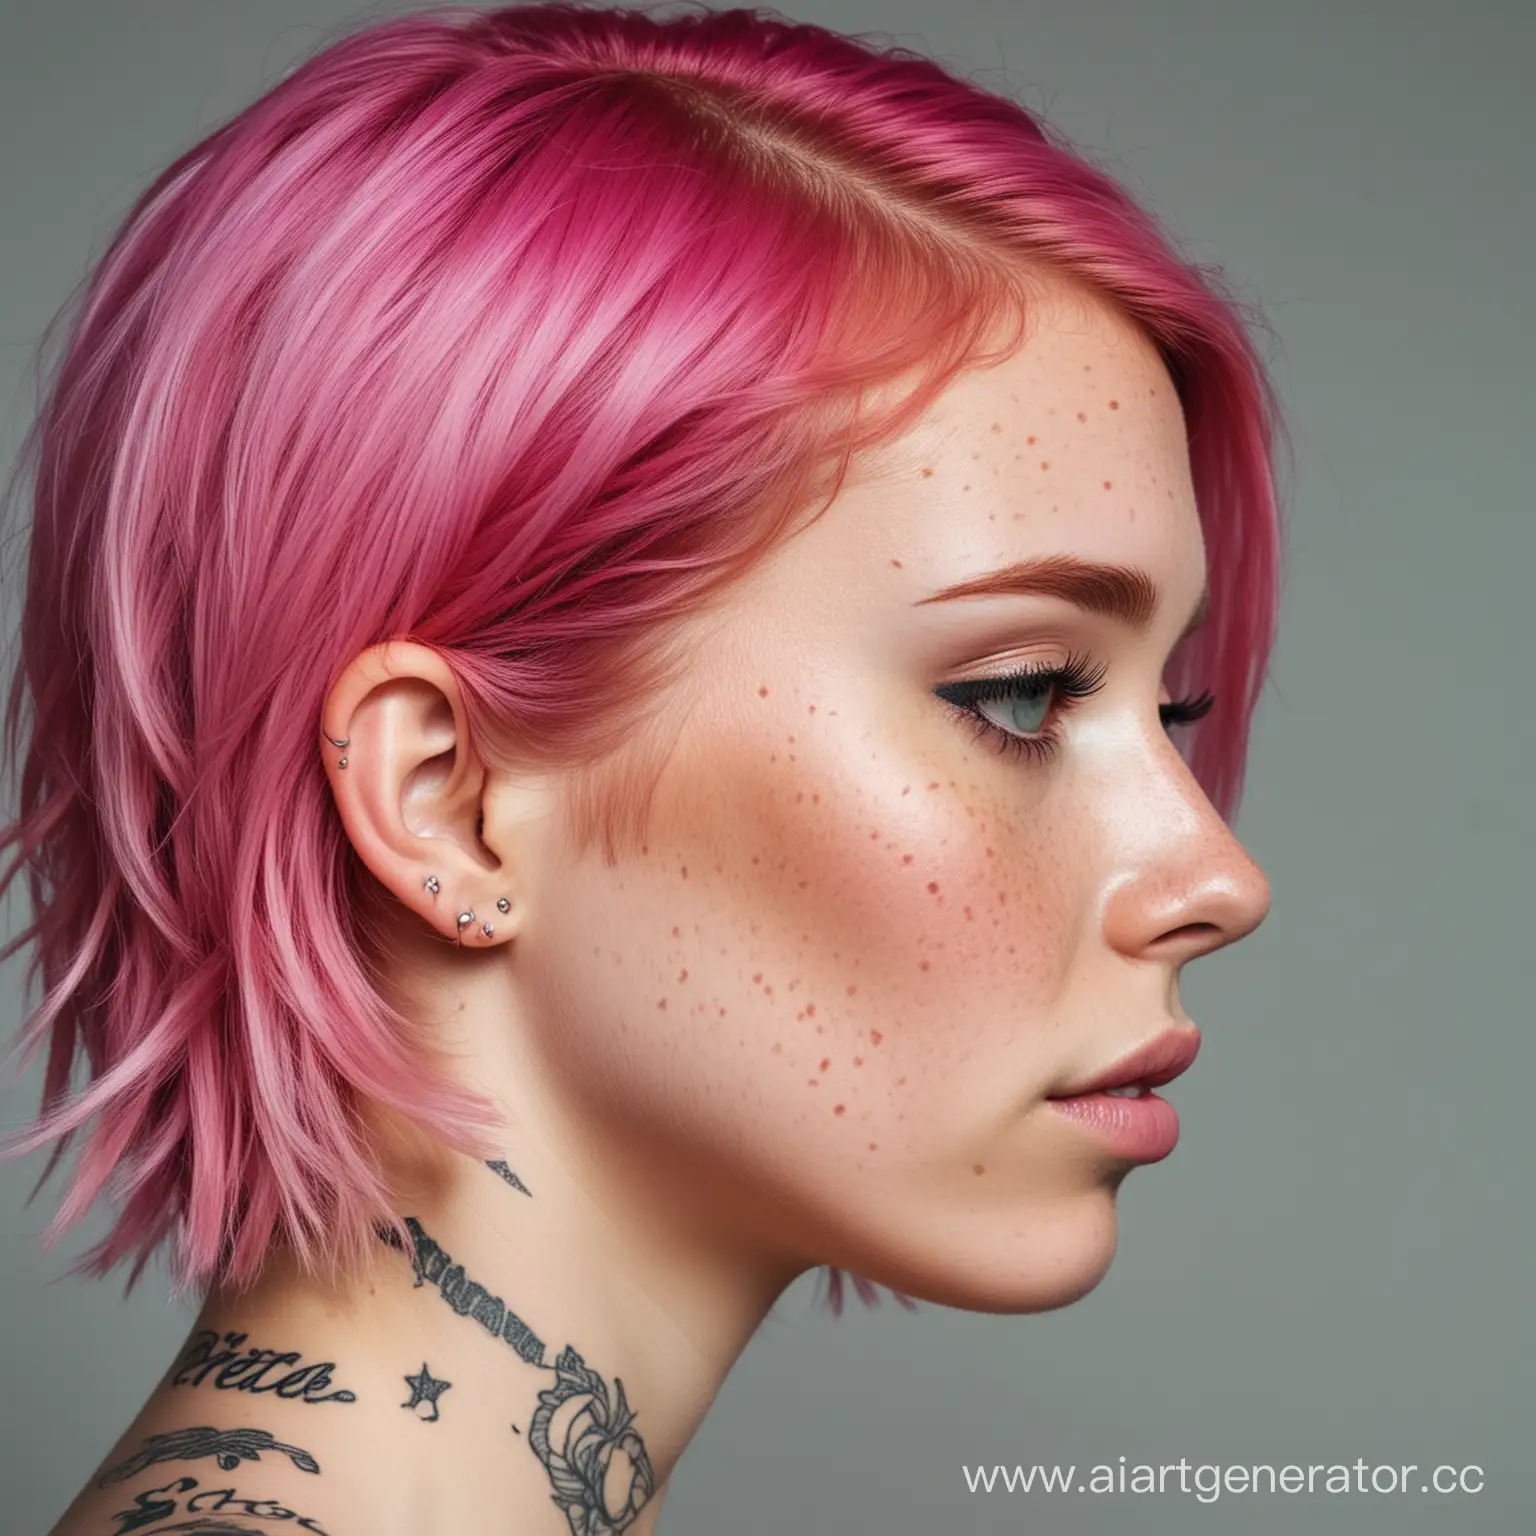 Girl-with-Pink-Hair-and-Freckles-Featuring-Face-Tattoo